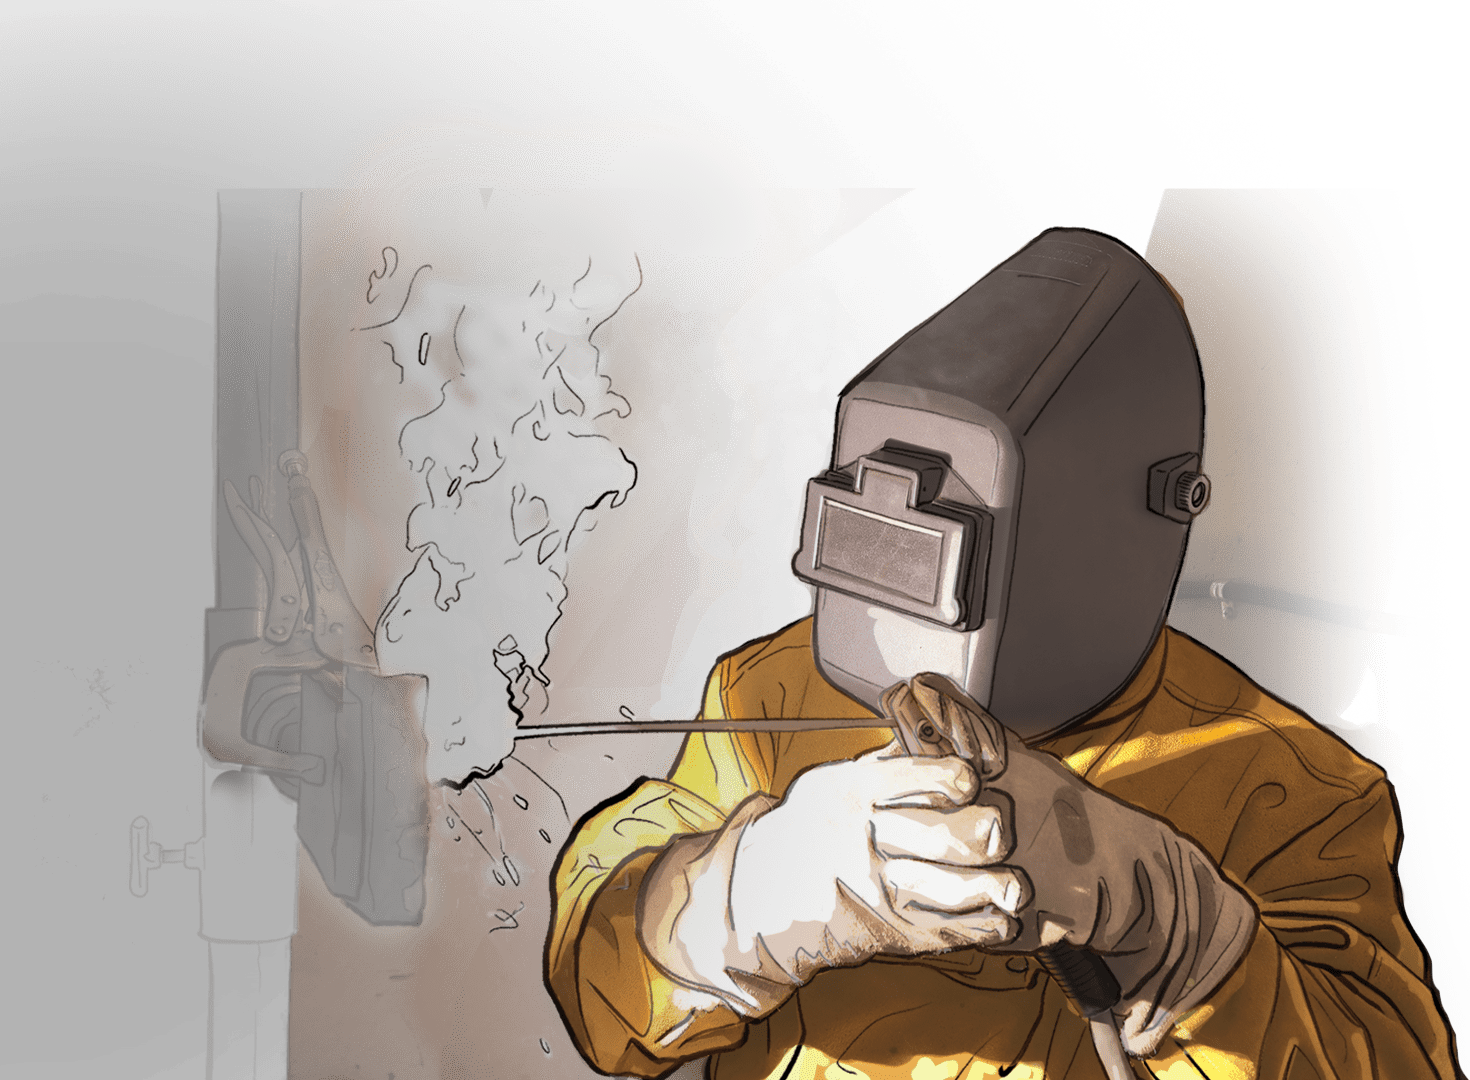 An illustration of a 麻豆传媒映画 welding student learning hands-on transitioning into a more realistic photograph.